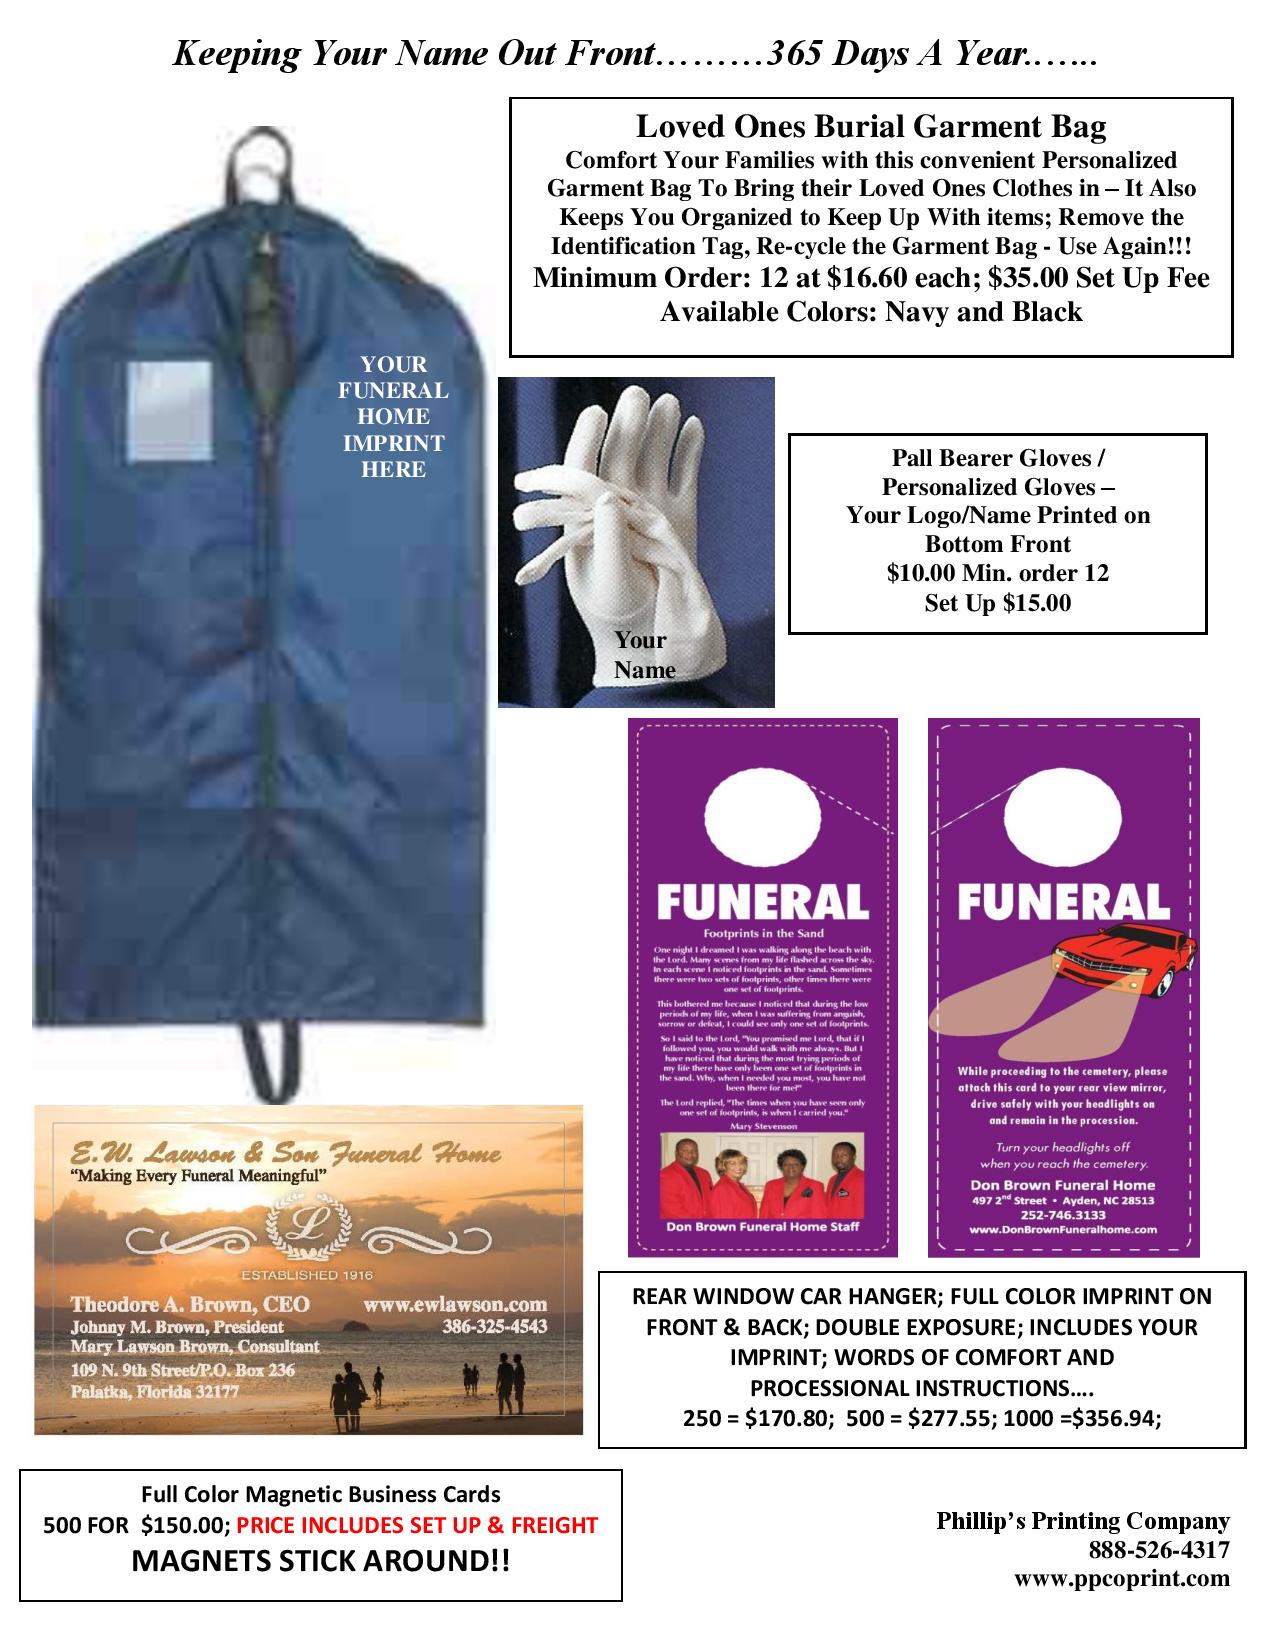 Garment Bags and Gloves